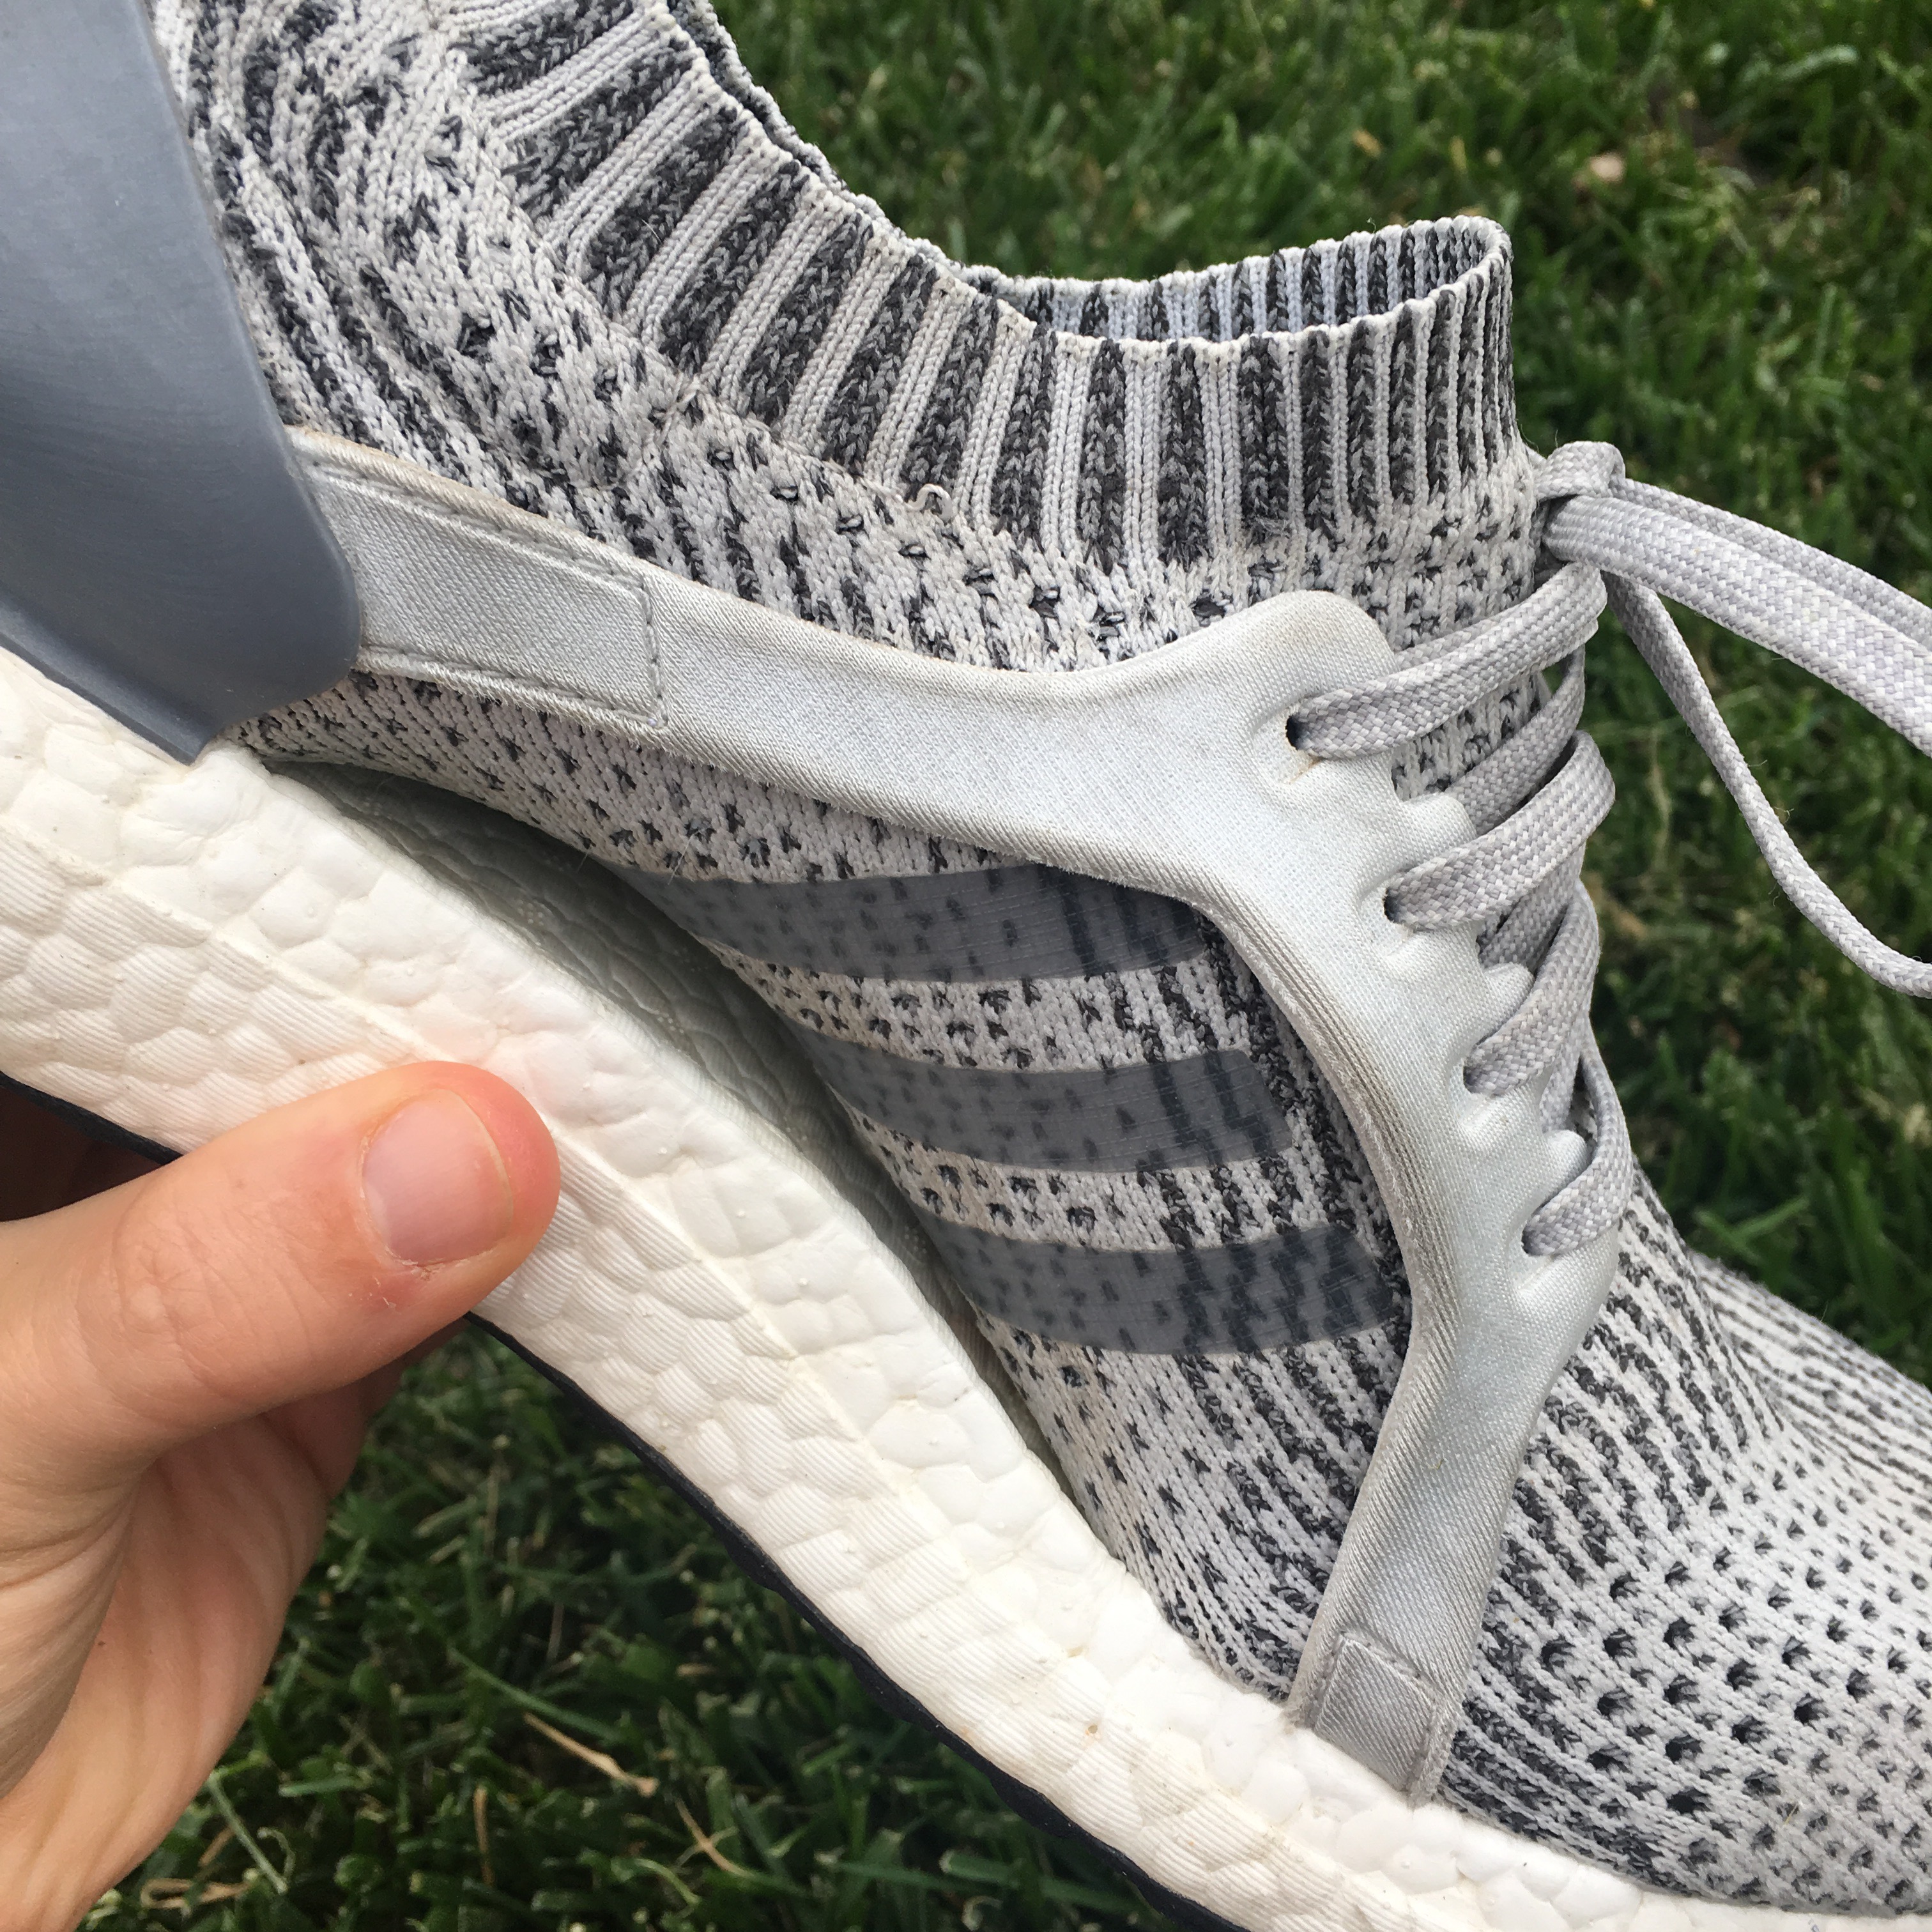 adidas ultra boost x review 2017